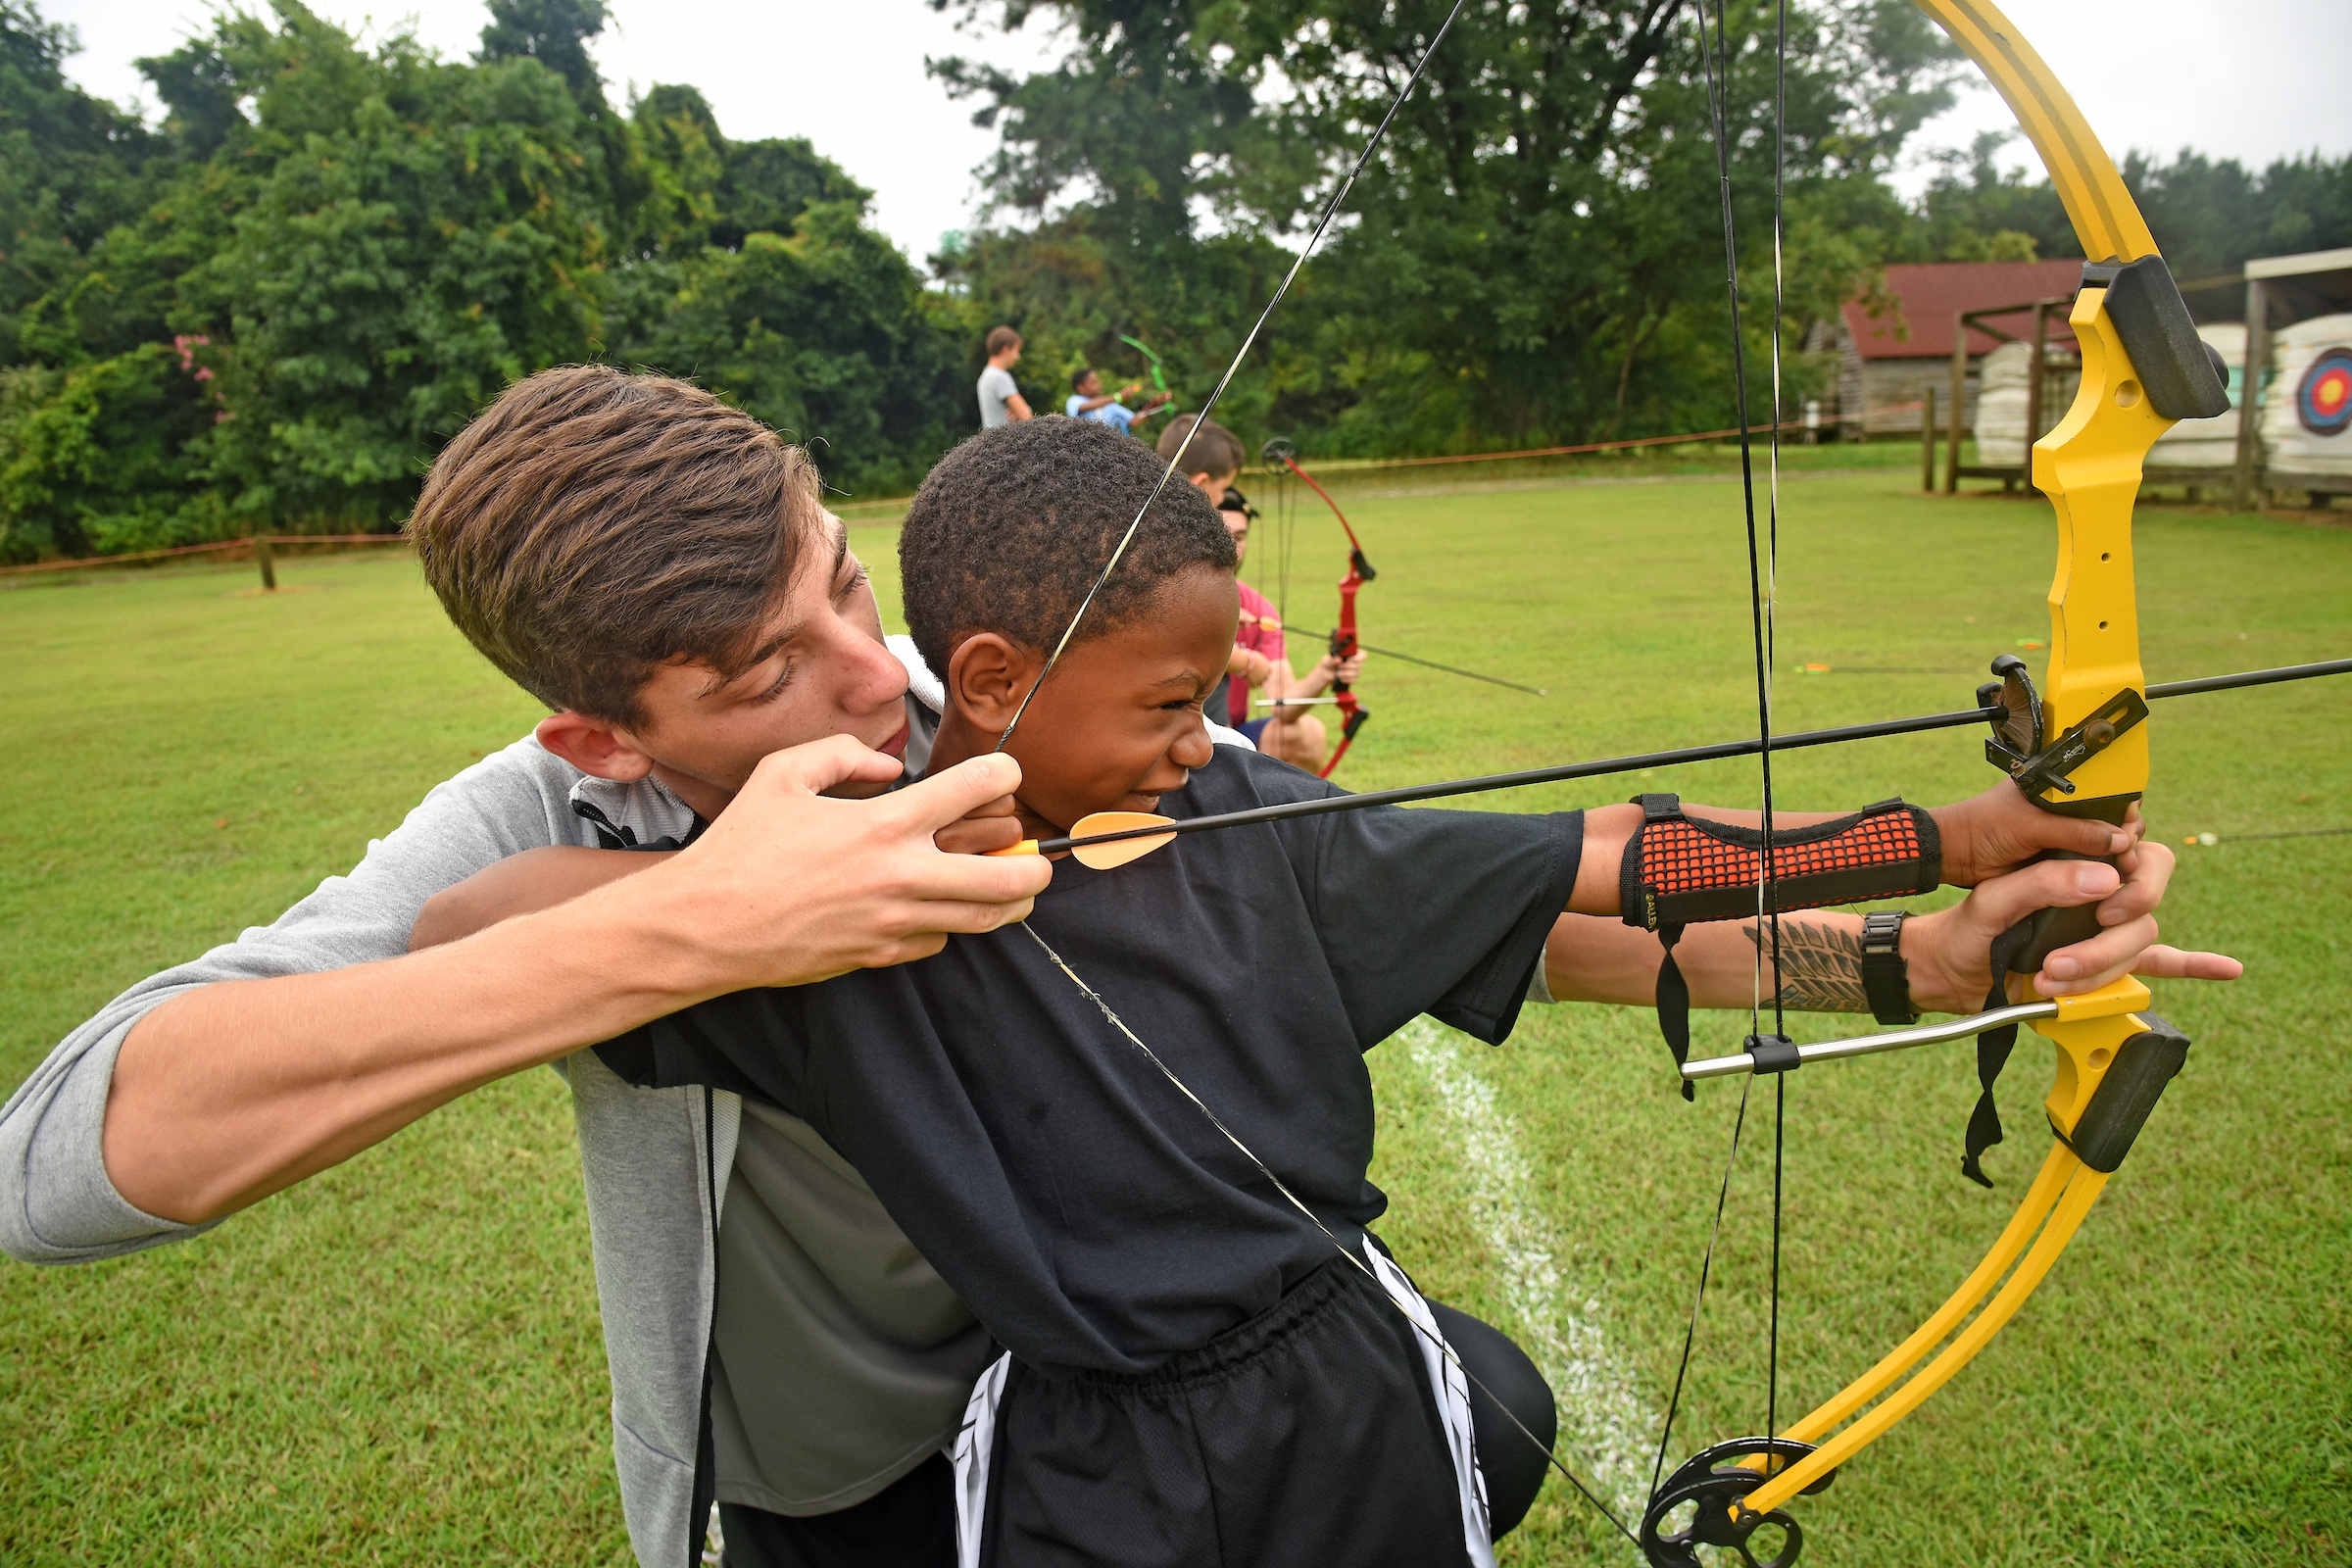 Eastern 4-H Camp counselor assists a camper with his aim during an archery session.